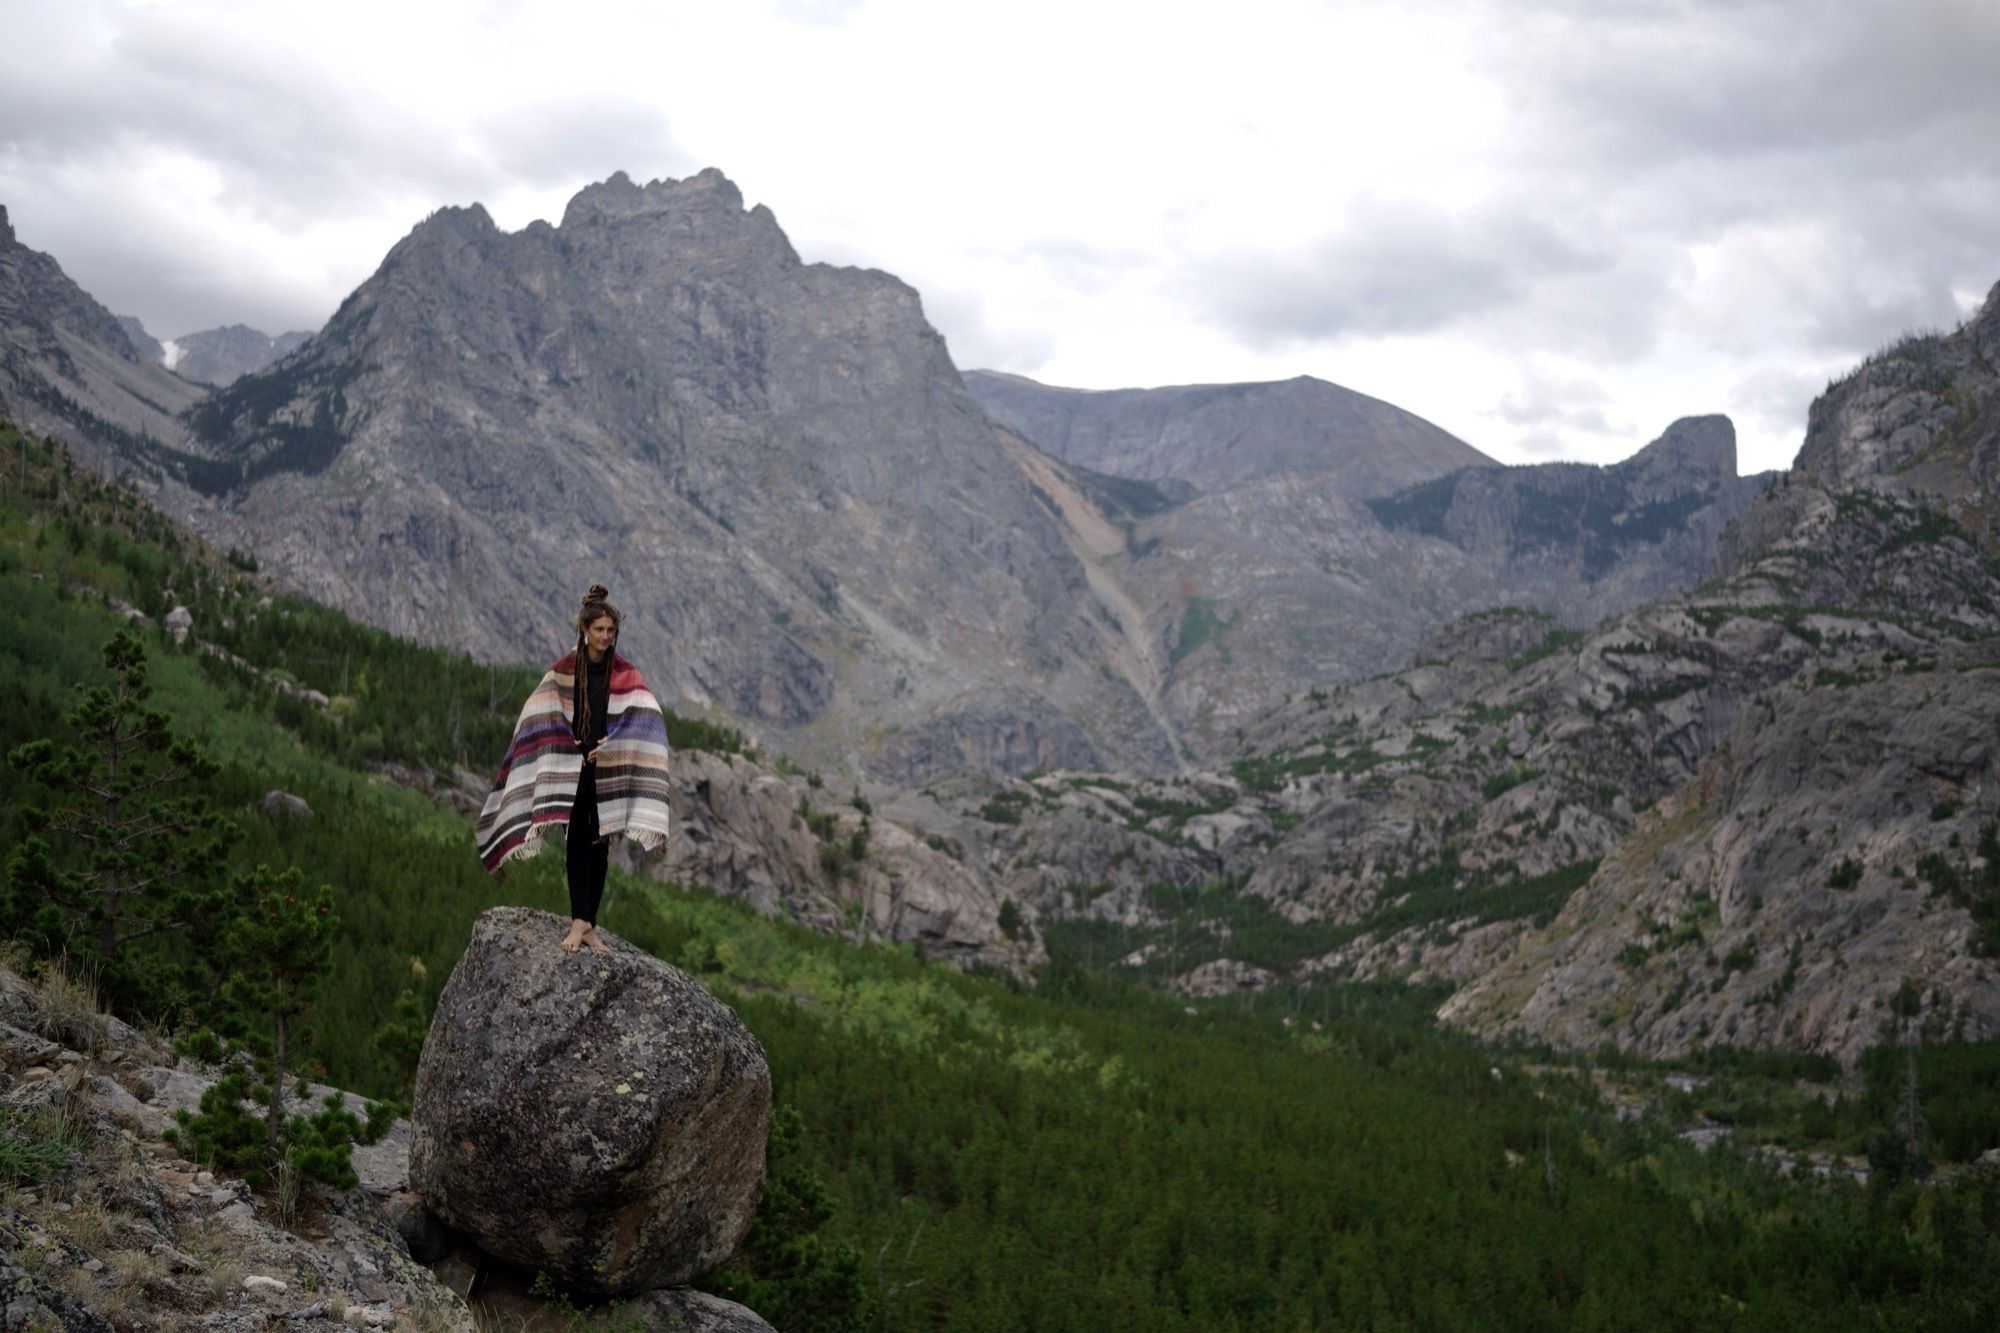 A woman stands atop a boulder wearing a handwoven striped blanket, in a majestic mountain valley